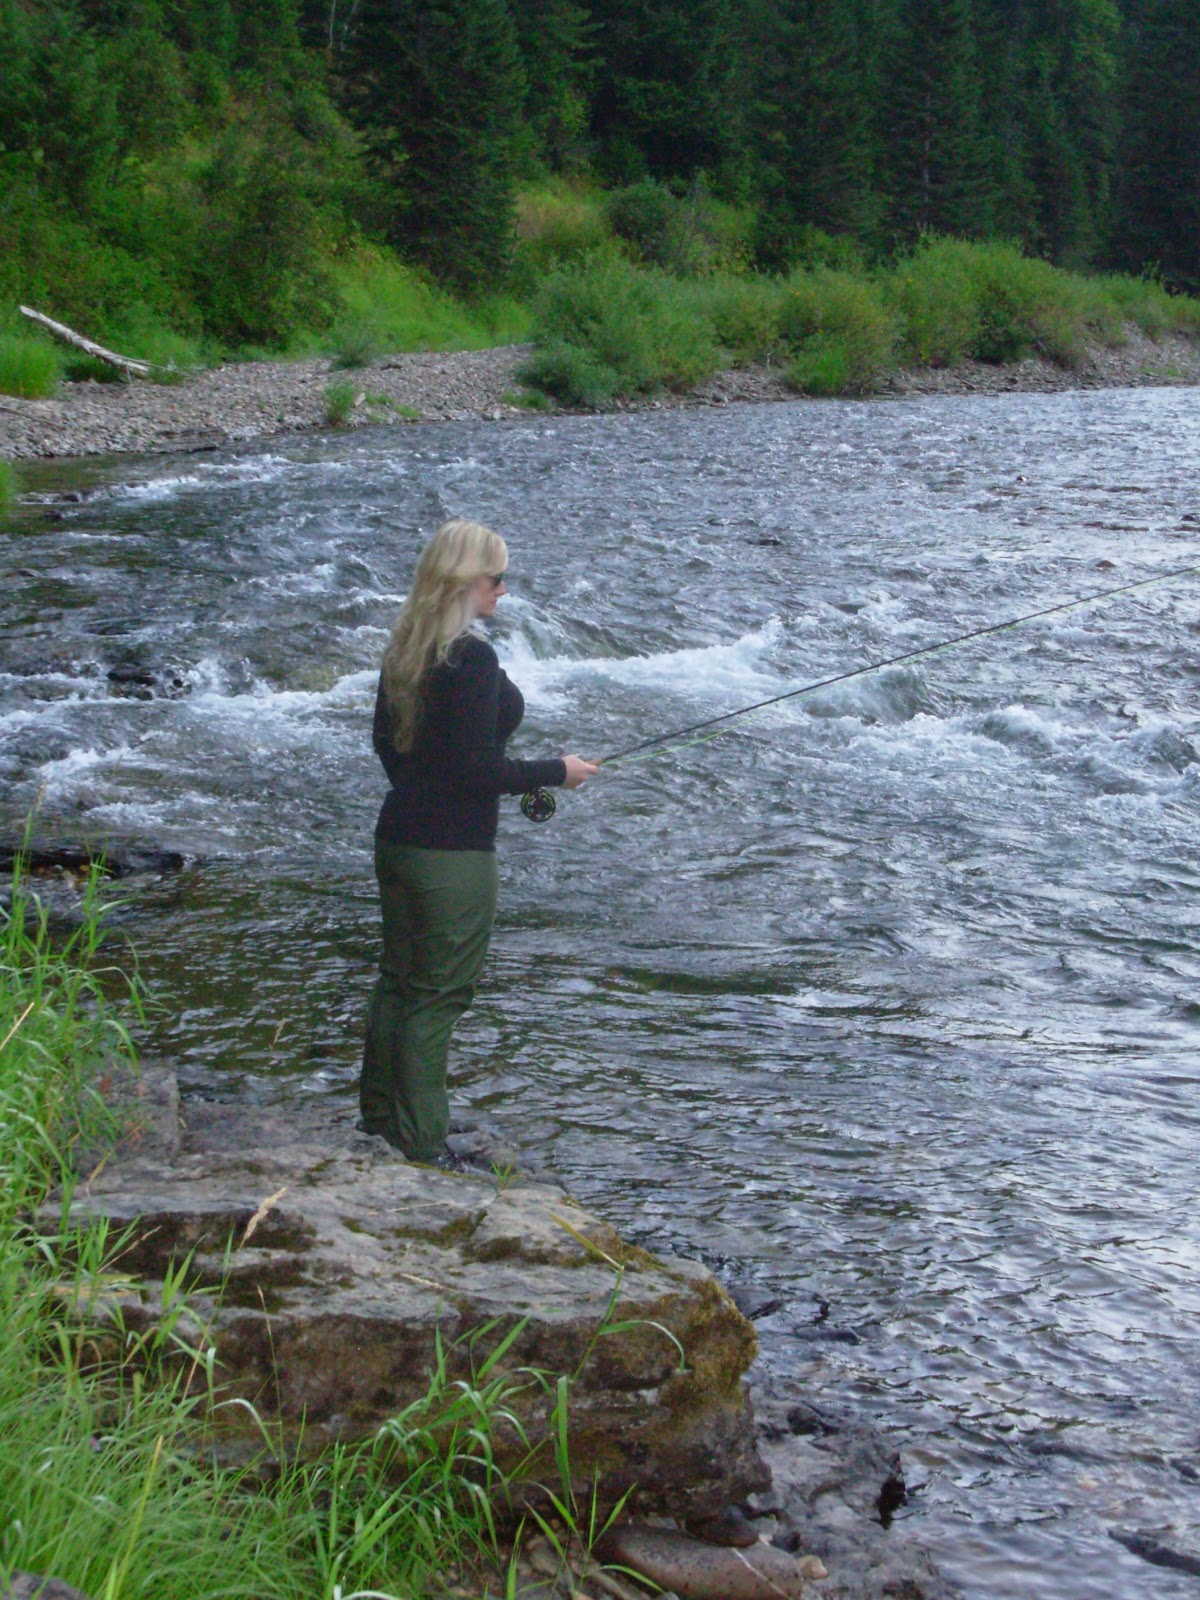 The Maine Outdoorsman: How to Choose the Perfect Waders for Fly Fishing